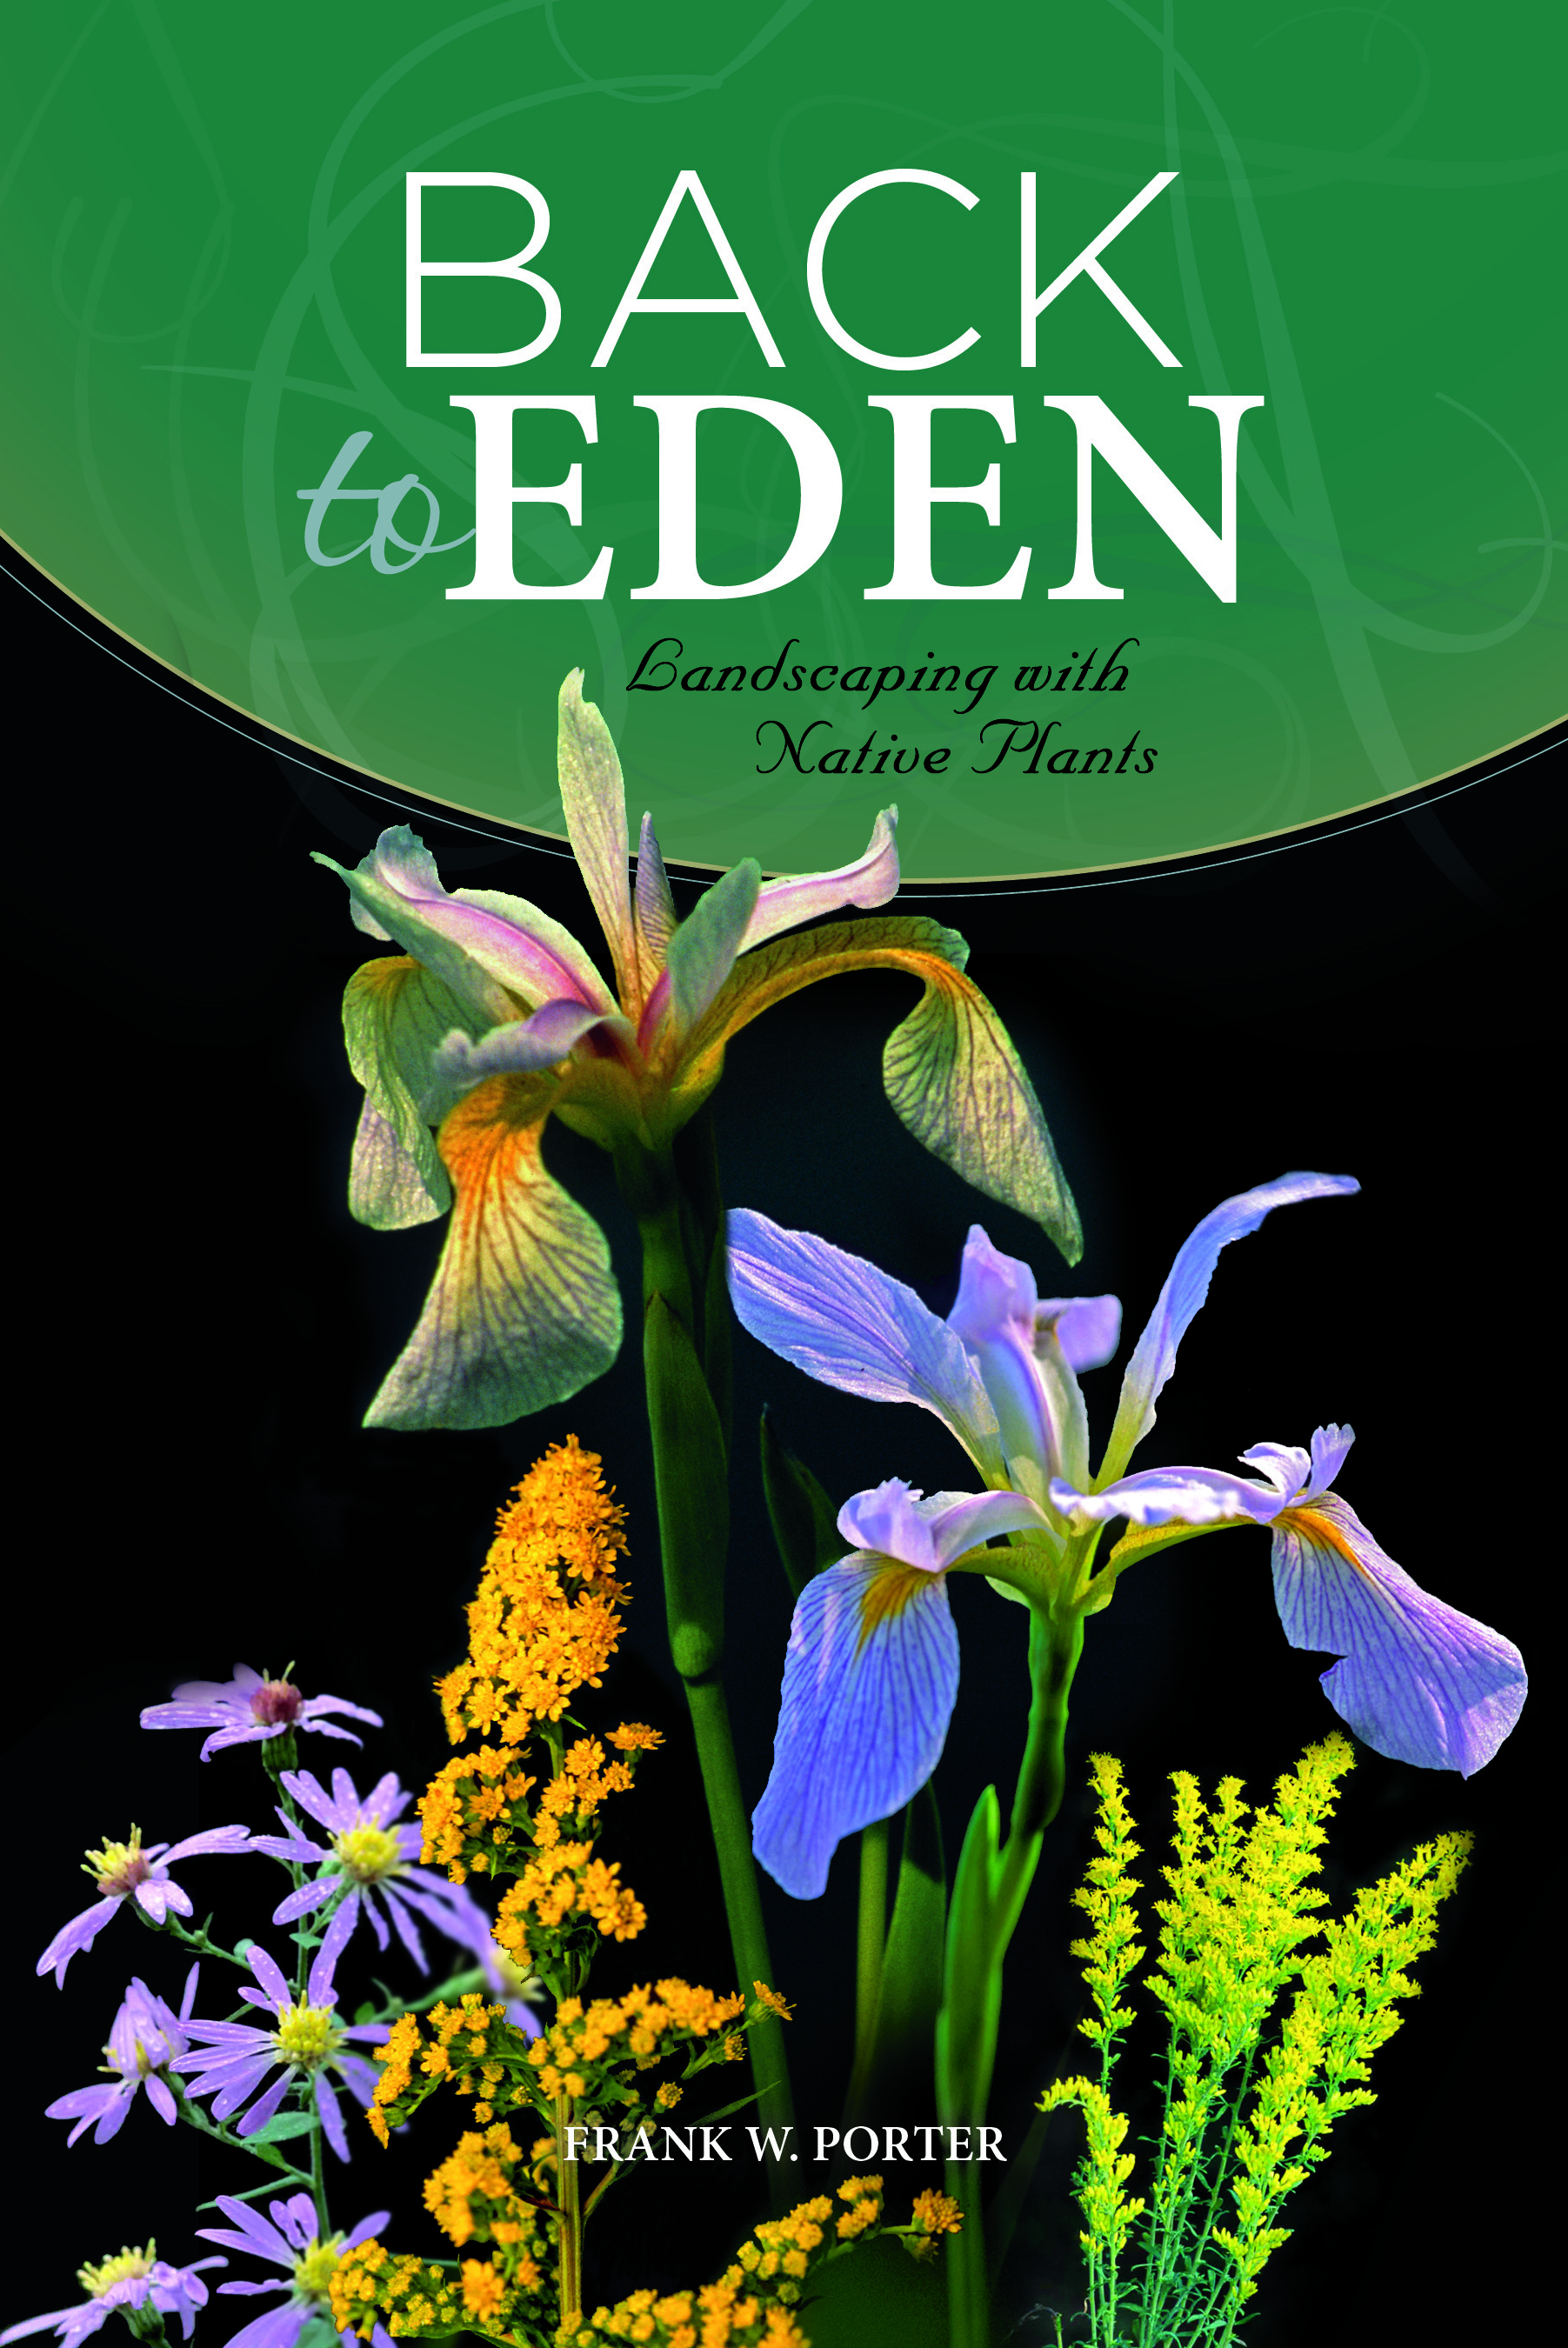 Back to Eden: Landscaping with Native Plants, by Dr. Frank Porter